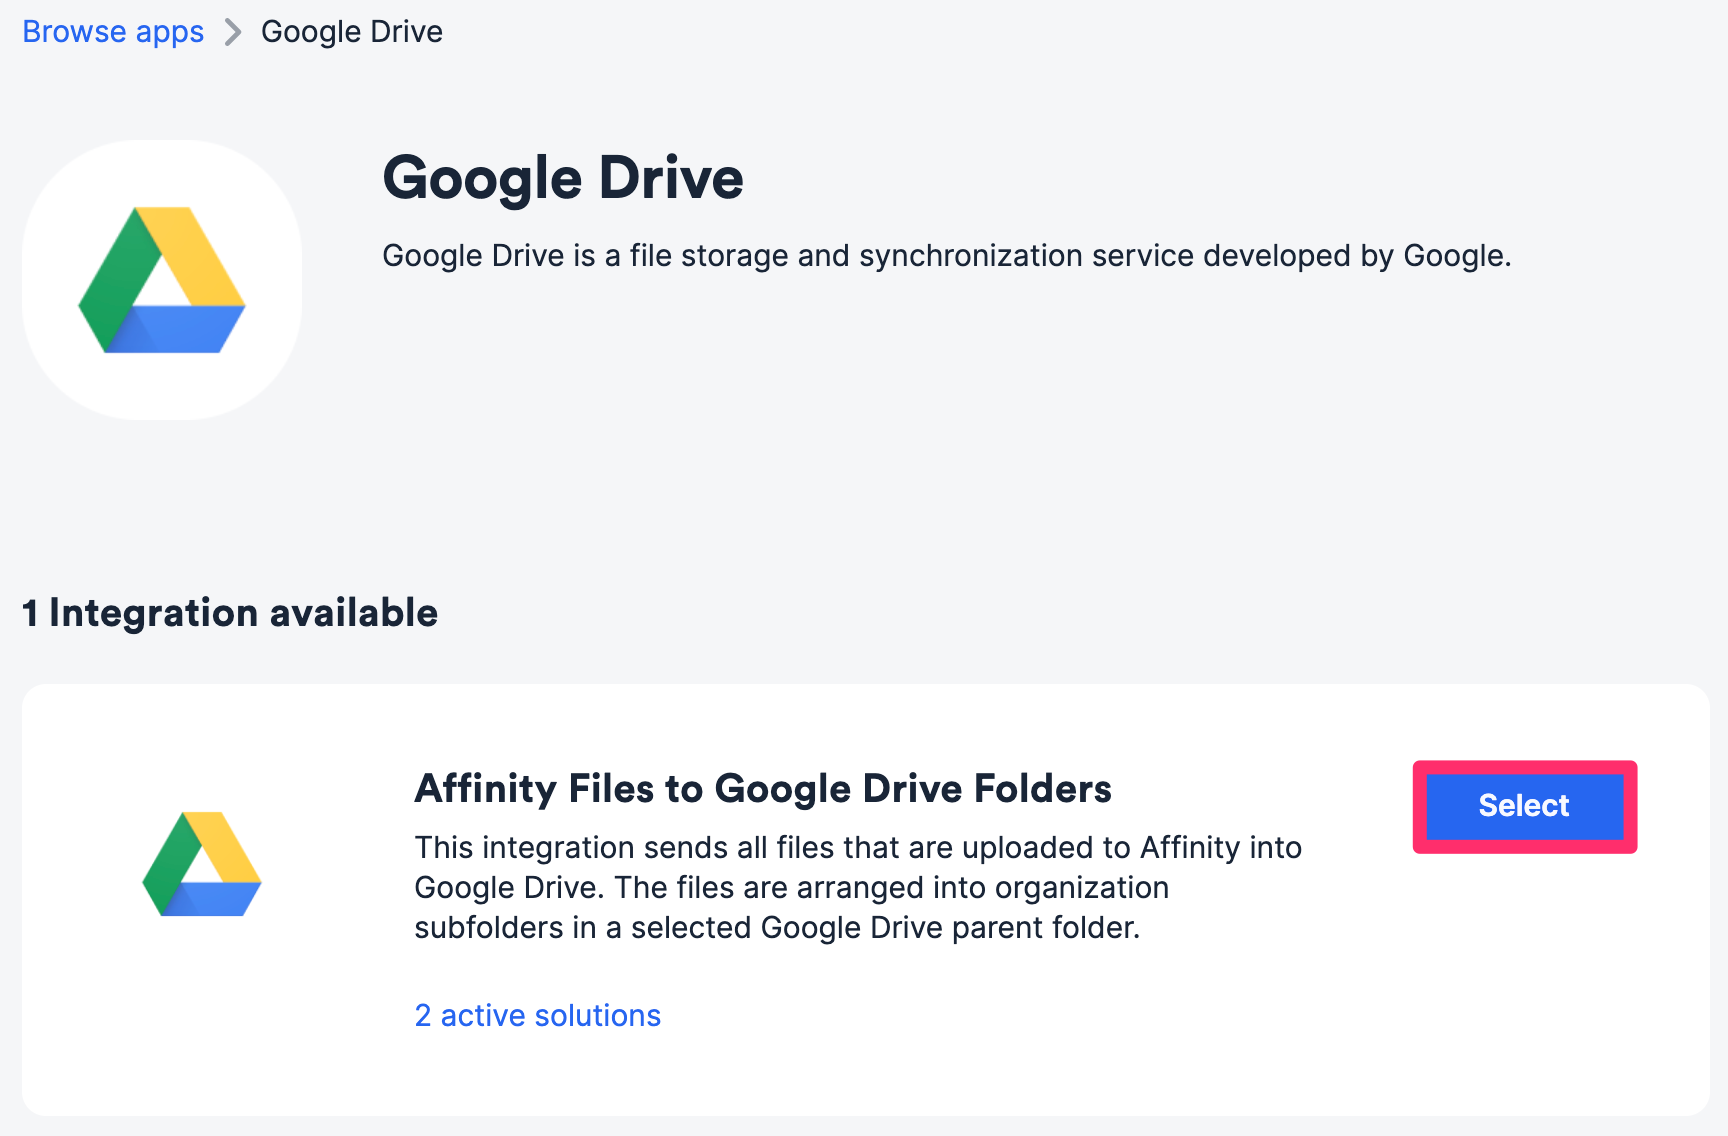 Affinity_Files_to_Google_Drive_Folders.png